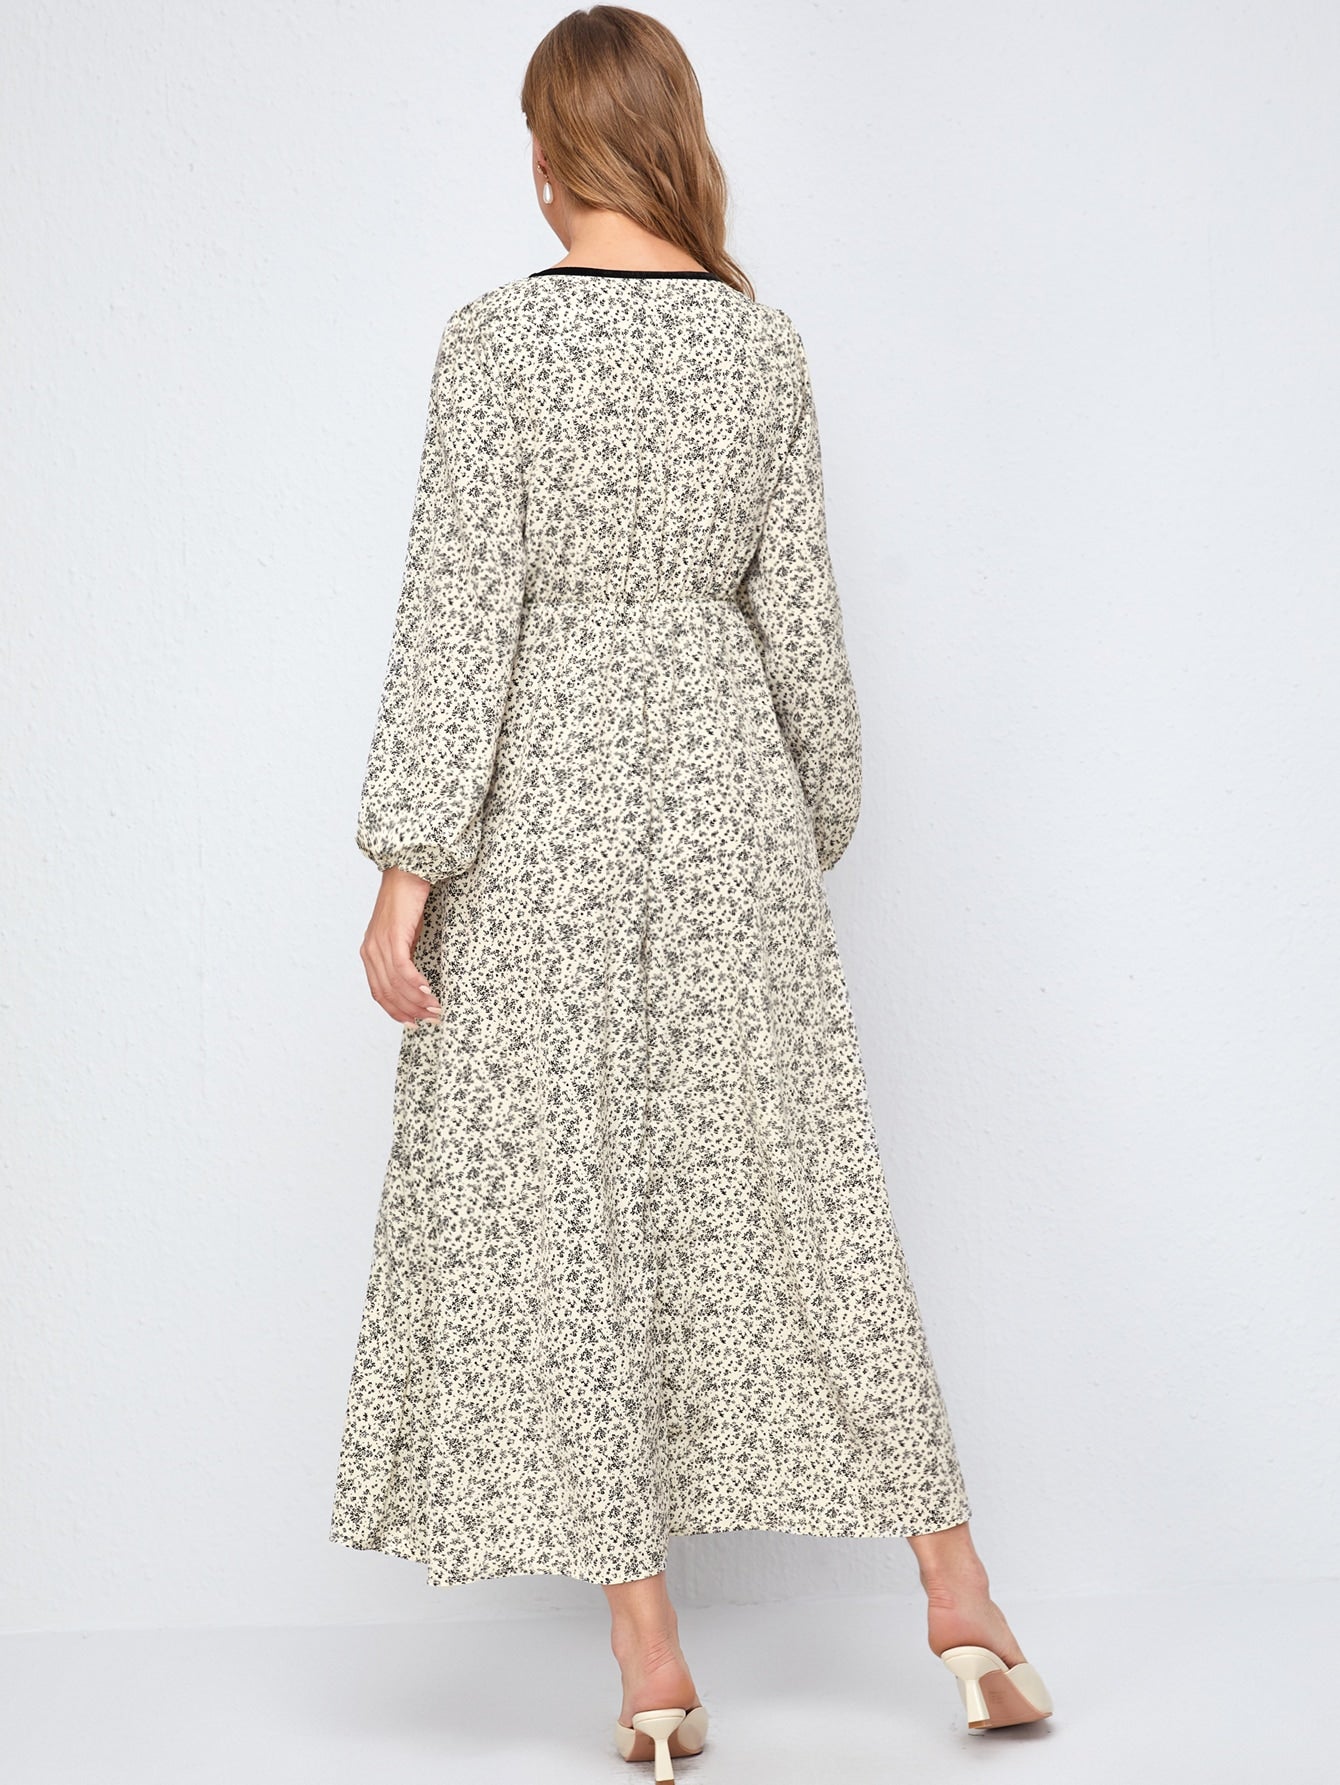 Contrast Binding Ditsy Floral A-line Dress